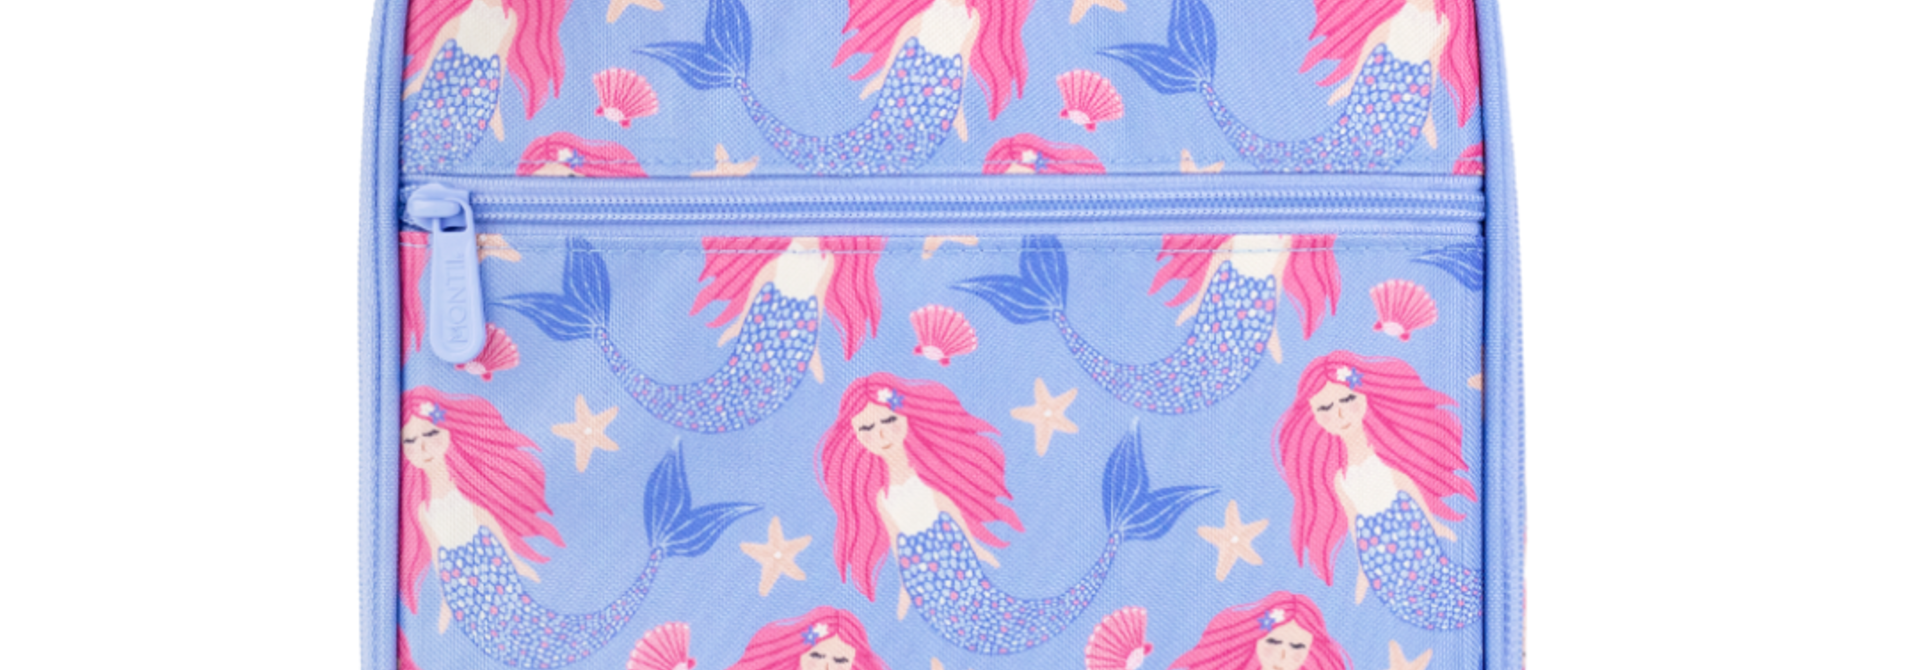 MontiiCo insulated Lunch Bag Large - Mermaid Tales